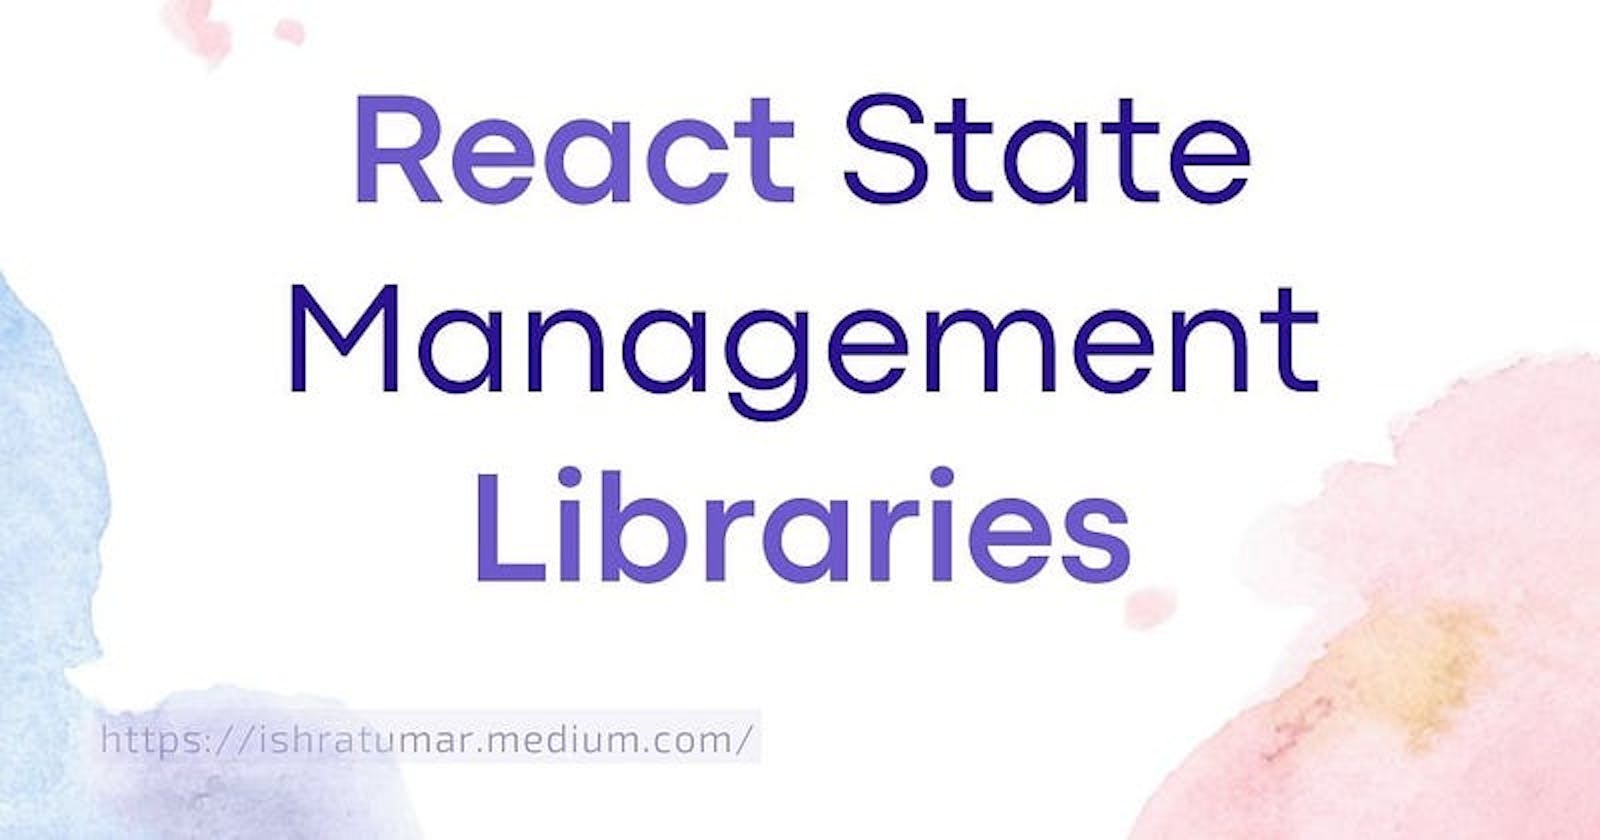 What is React State Management?